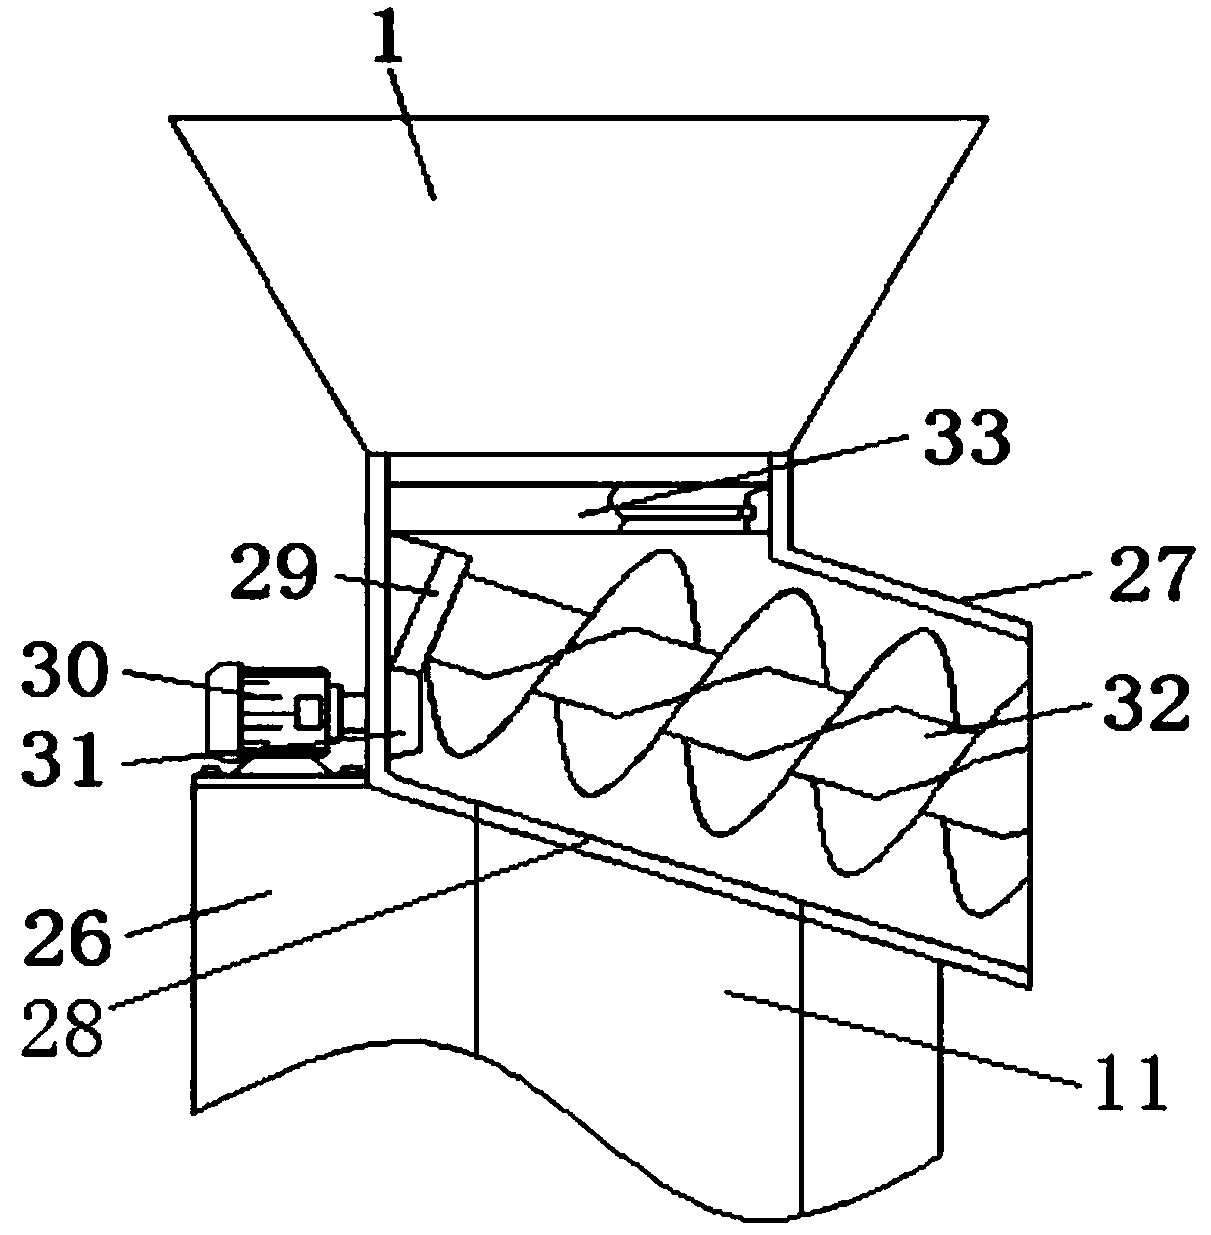 Drum fixation machine with impurity removing and screening functions